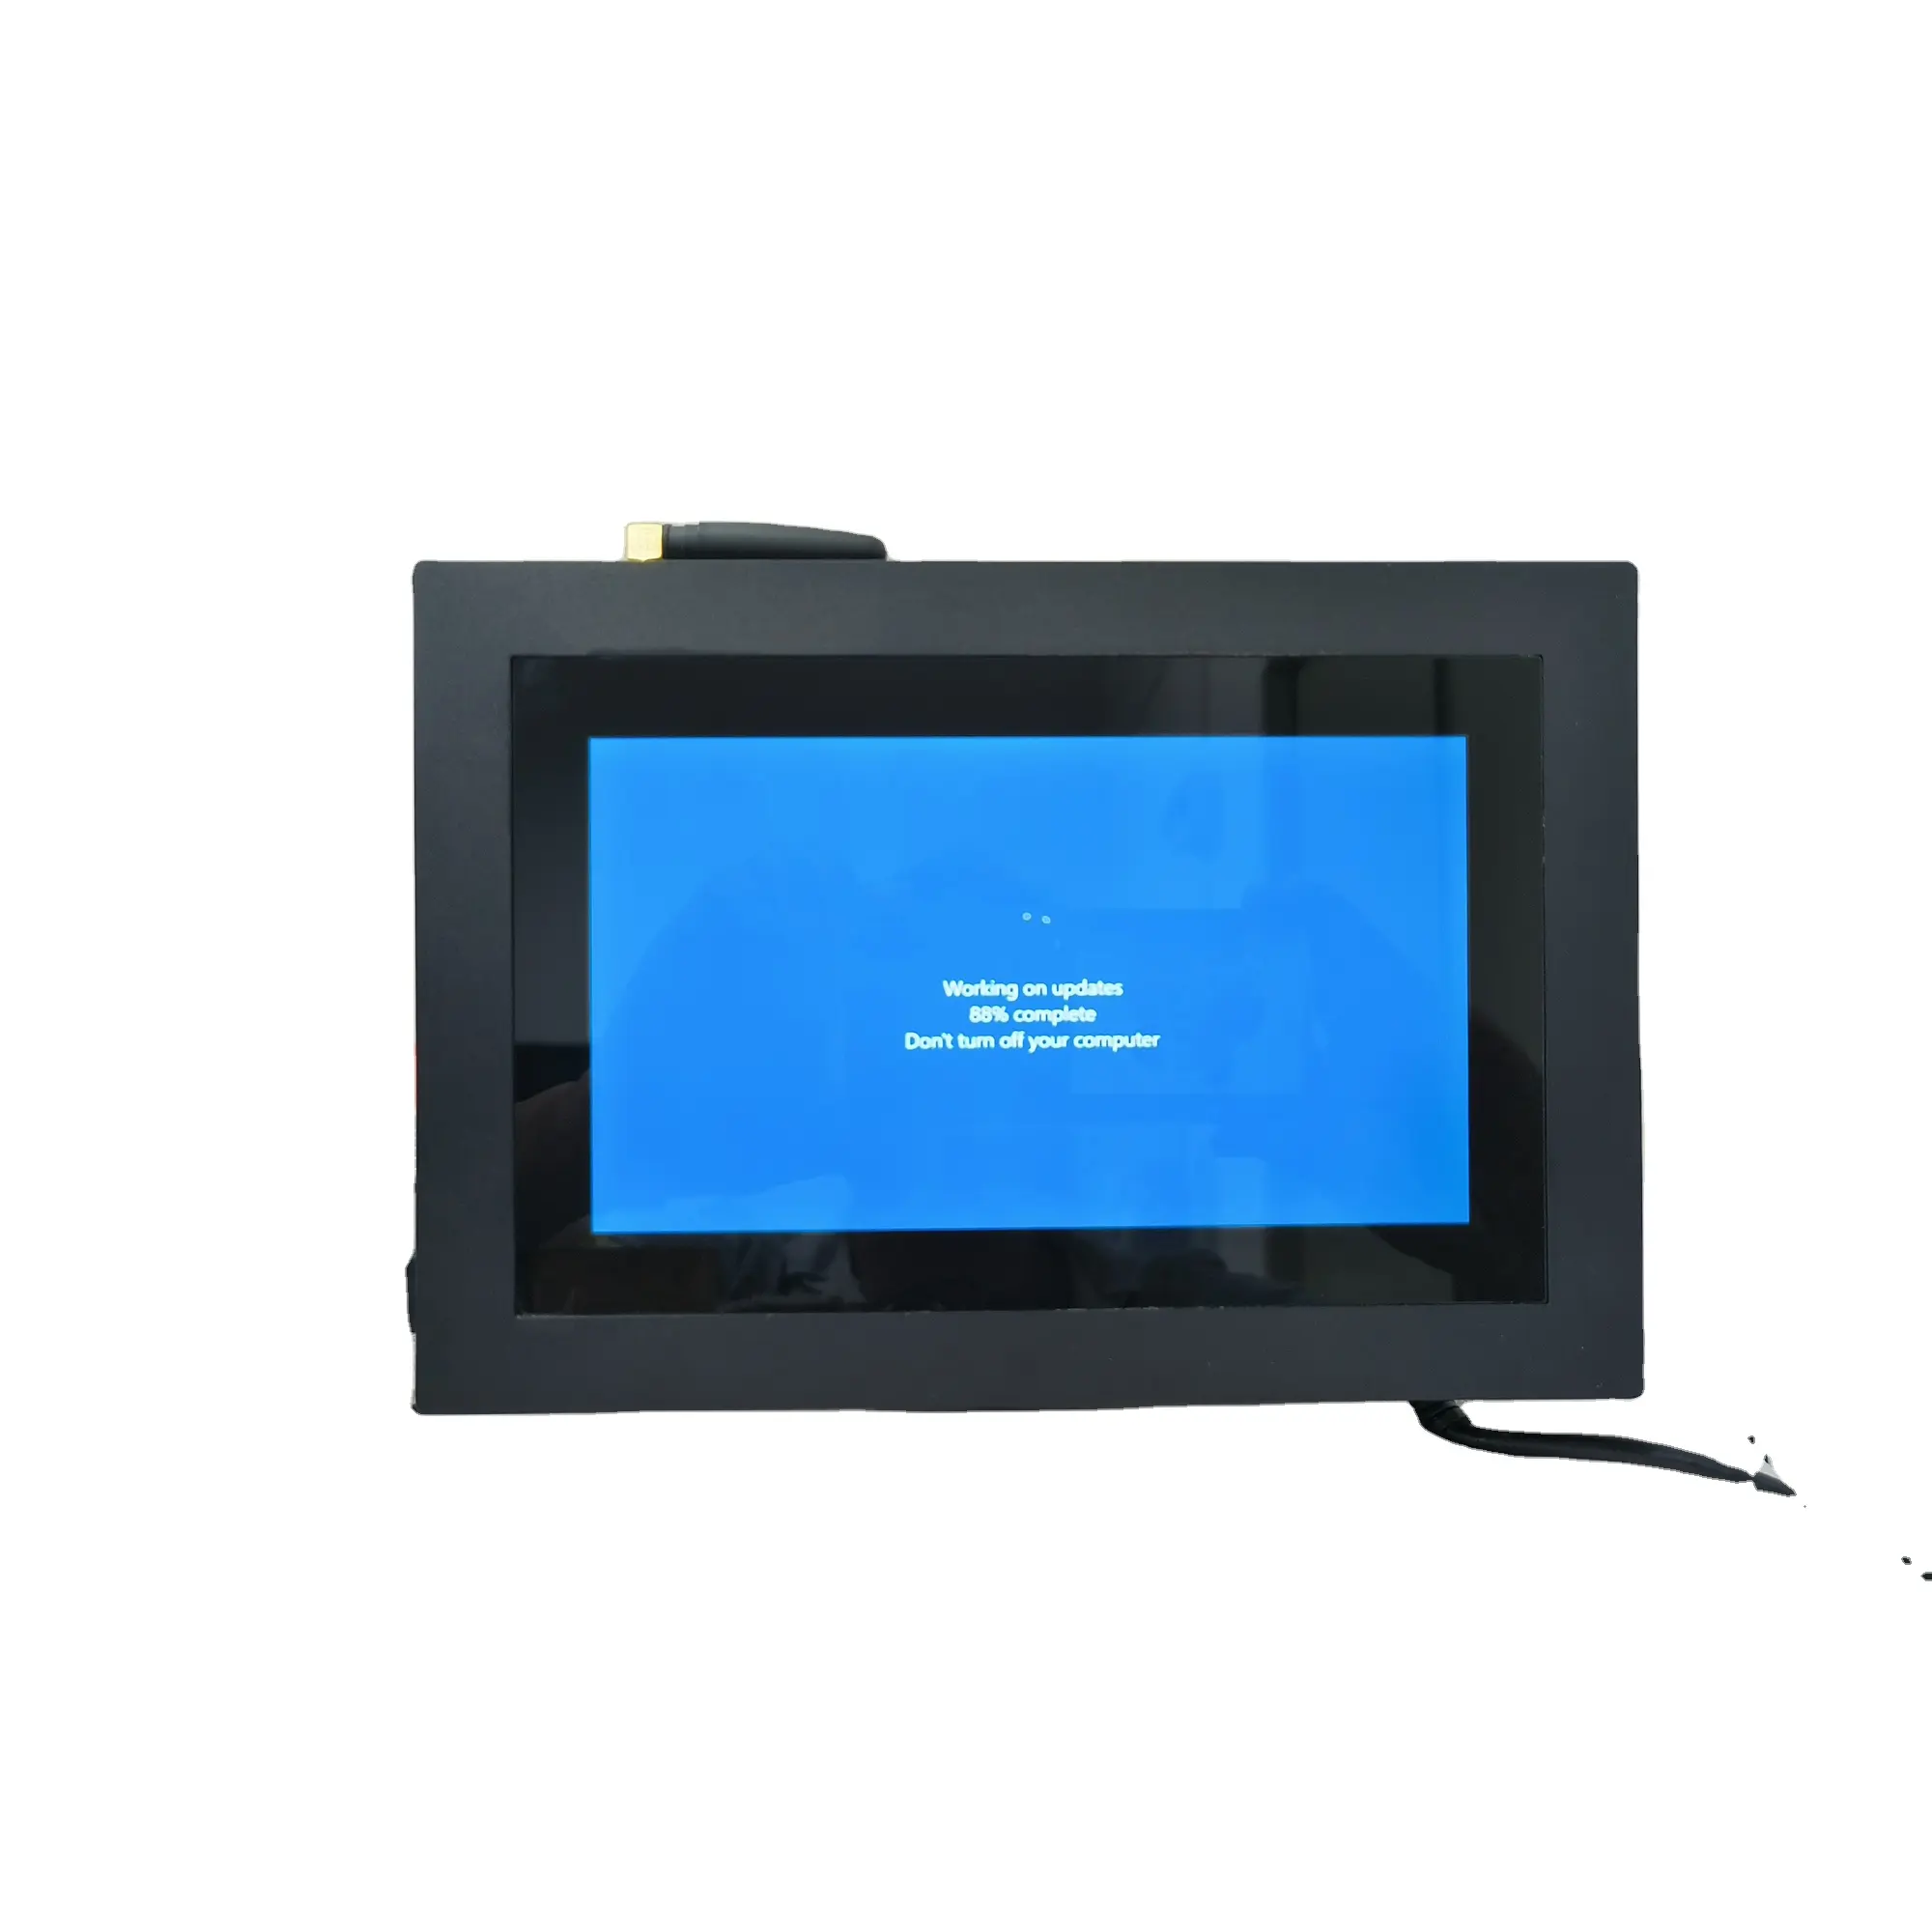 Small Size Rugged Metal 7" Inch LED LCD Industrial Tablet Capacitive Touch Screen Panel PC HMI Support Wind0ws Linux OS